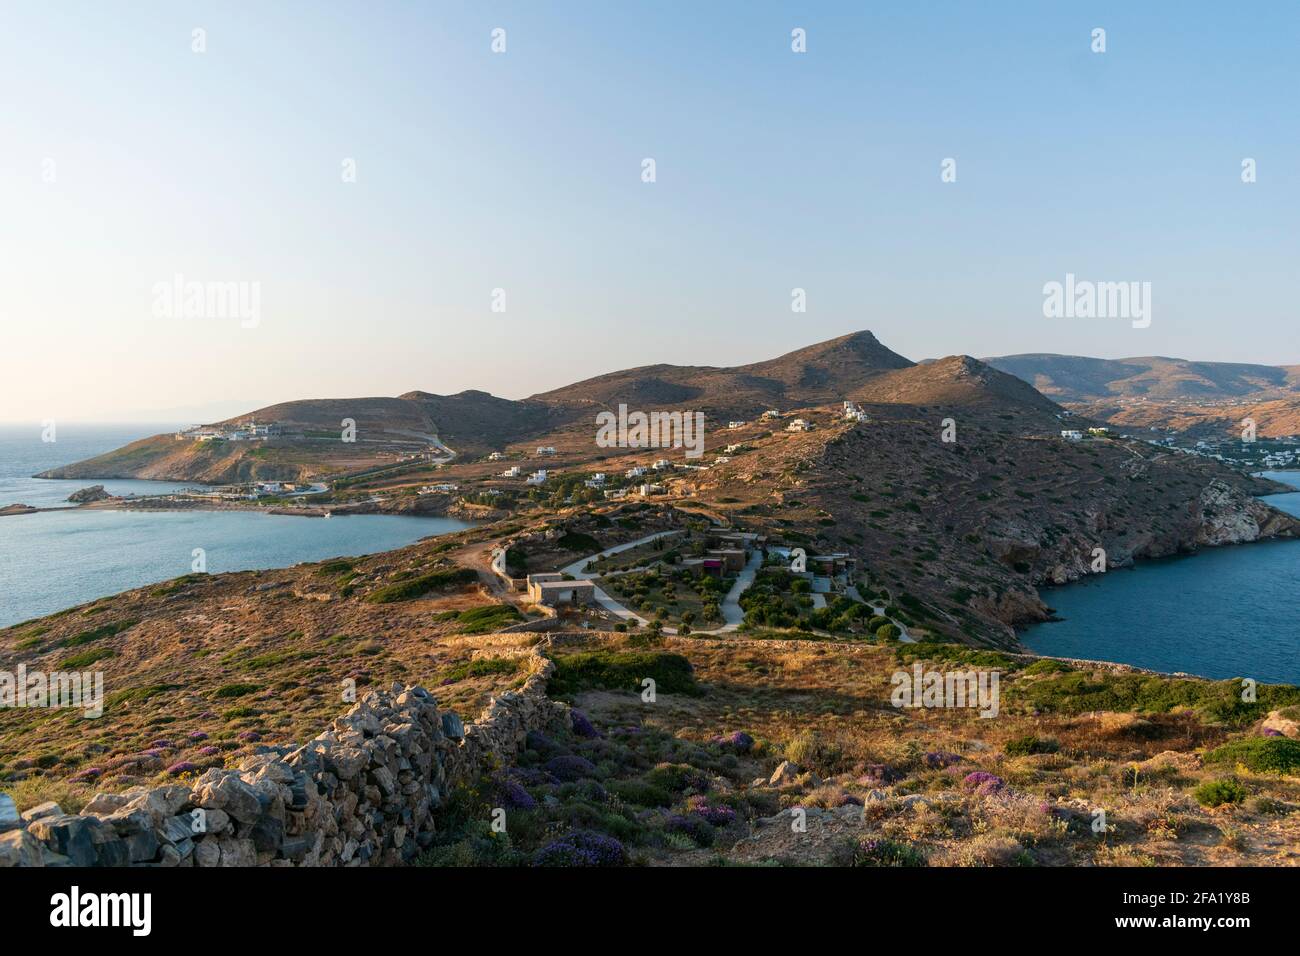 View of the landscape in Ios Greece Stock Photo